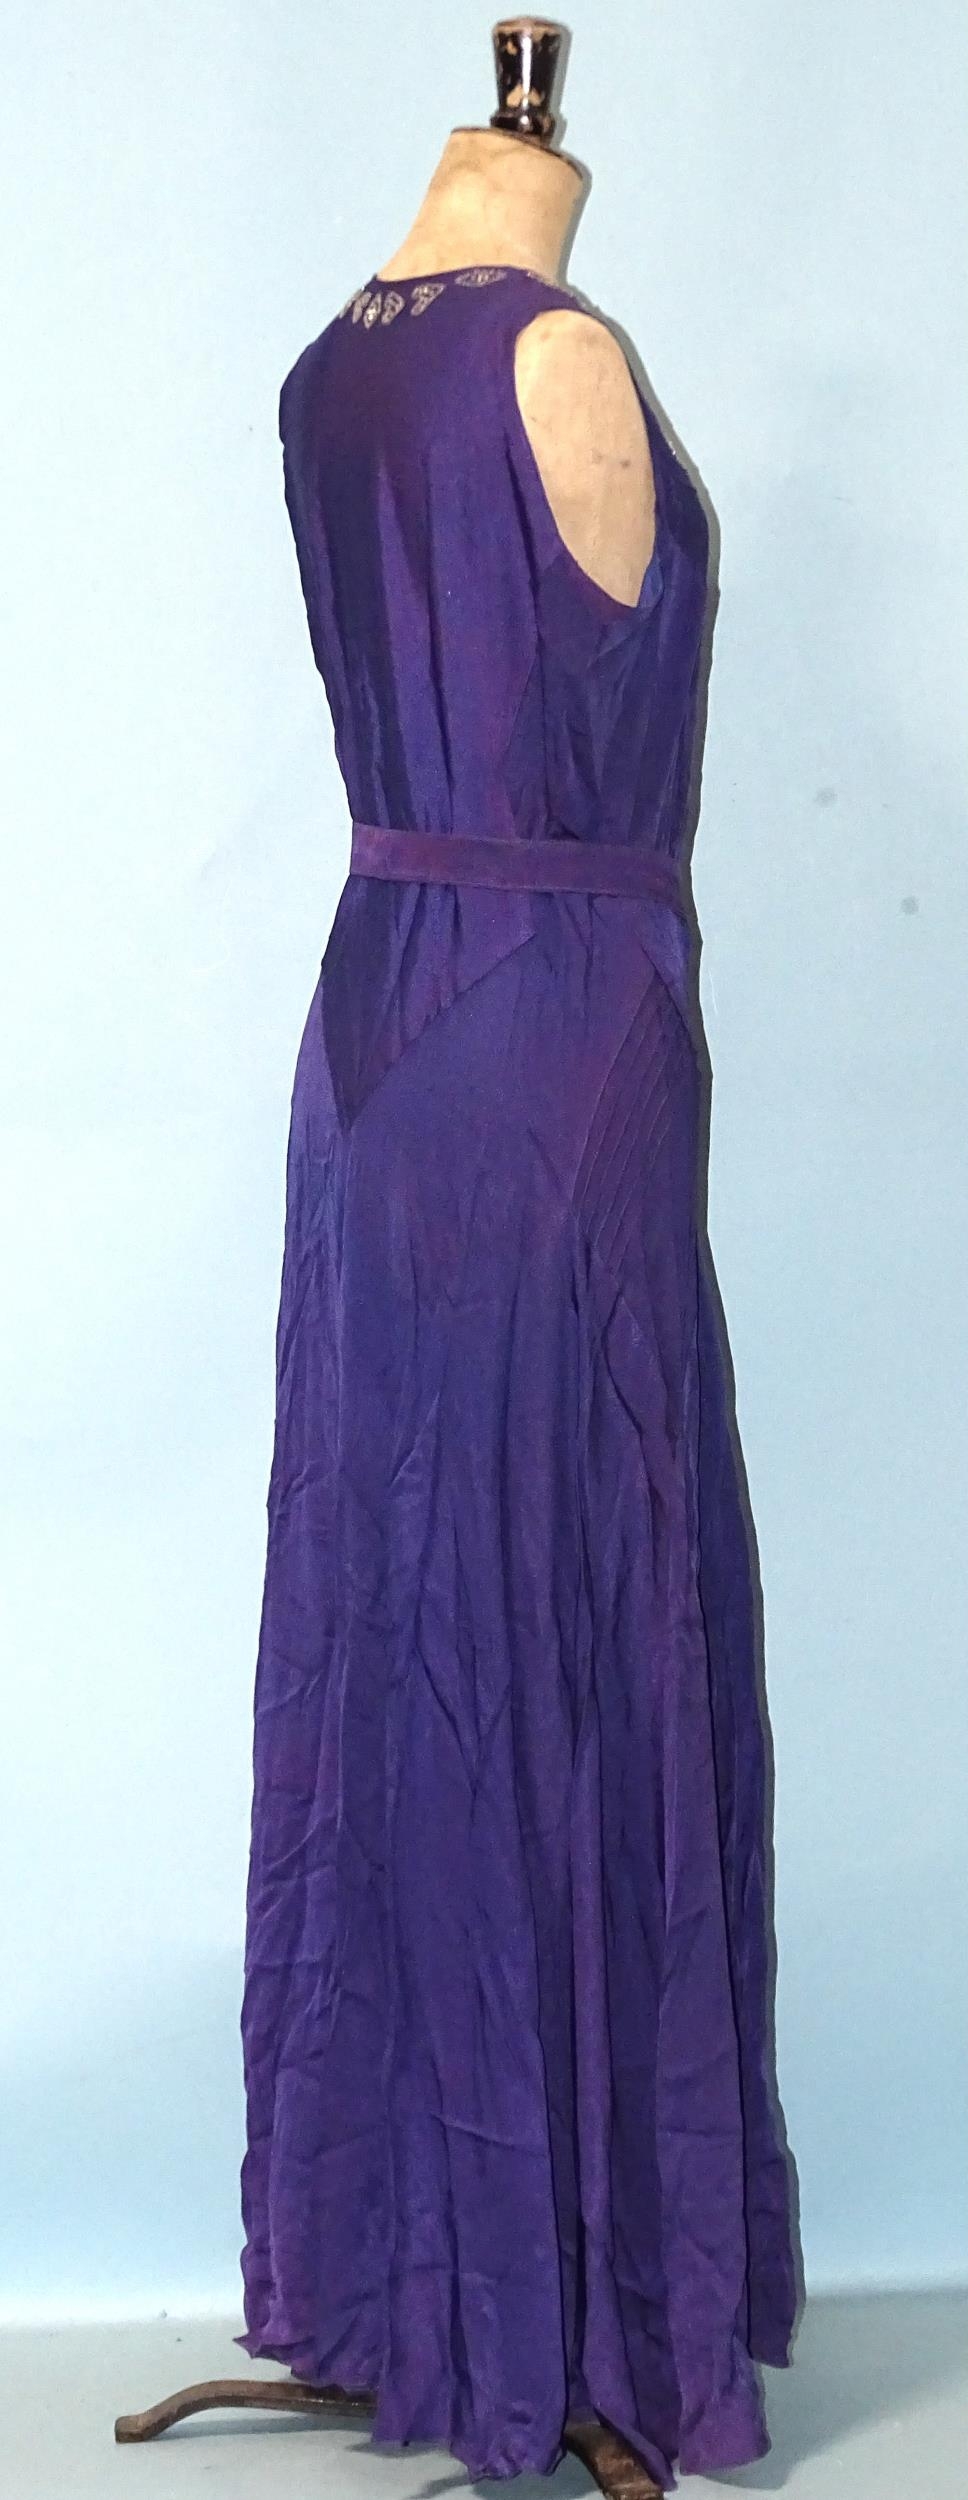 A 1930's evening dress of purple satin-like material, sleeveless, with hand-beading to neckline, the - Image 2 of 5